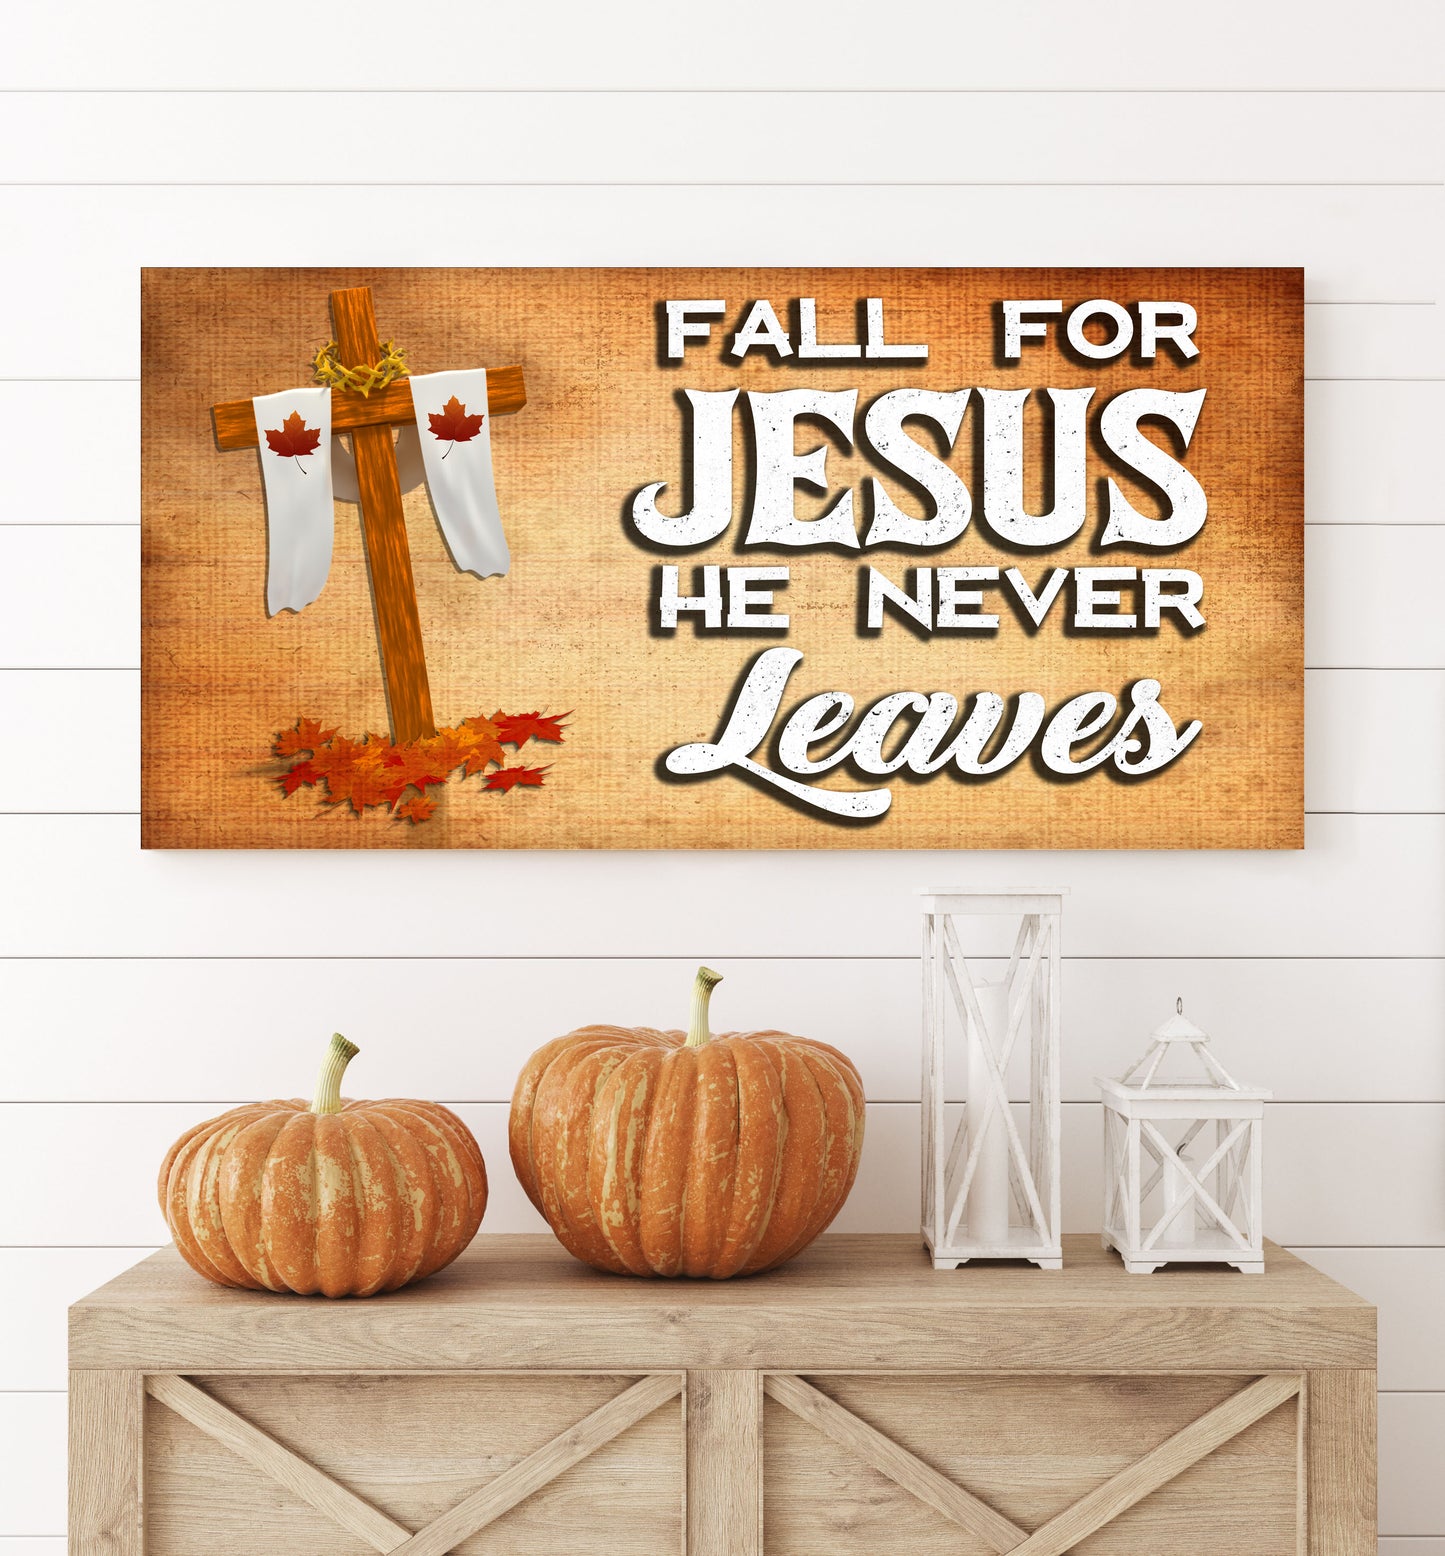 Fall For Jesus He Never Leaves Sign - Image by Tailored Canvases